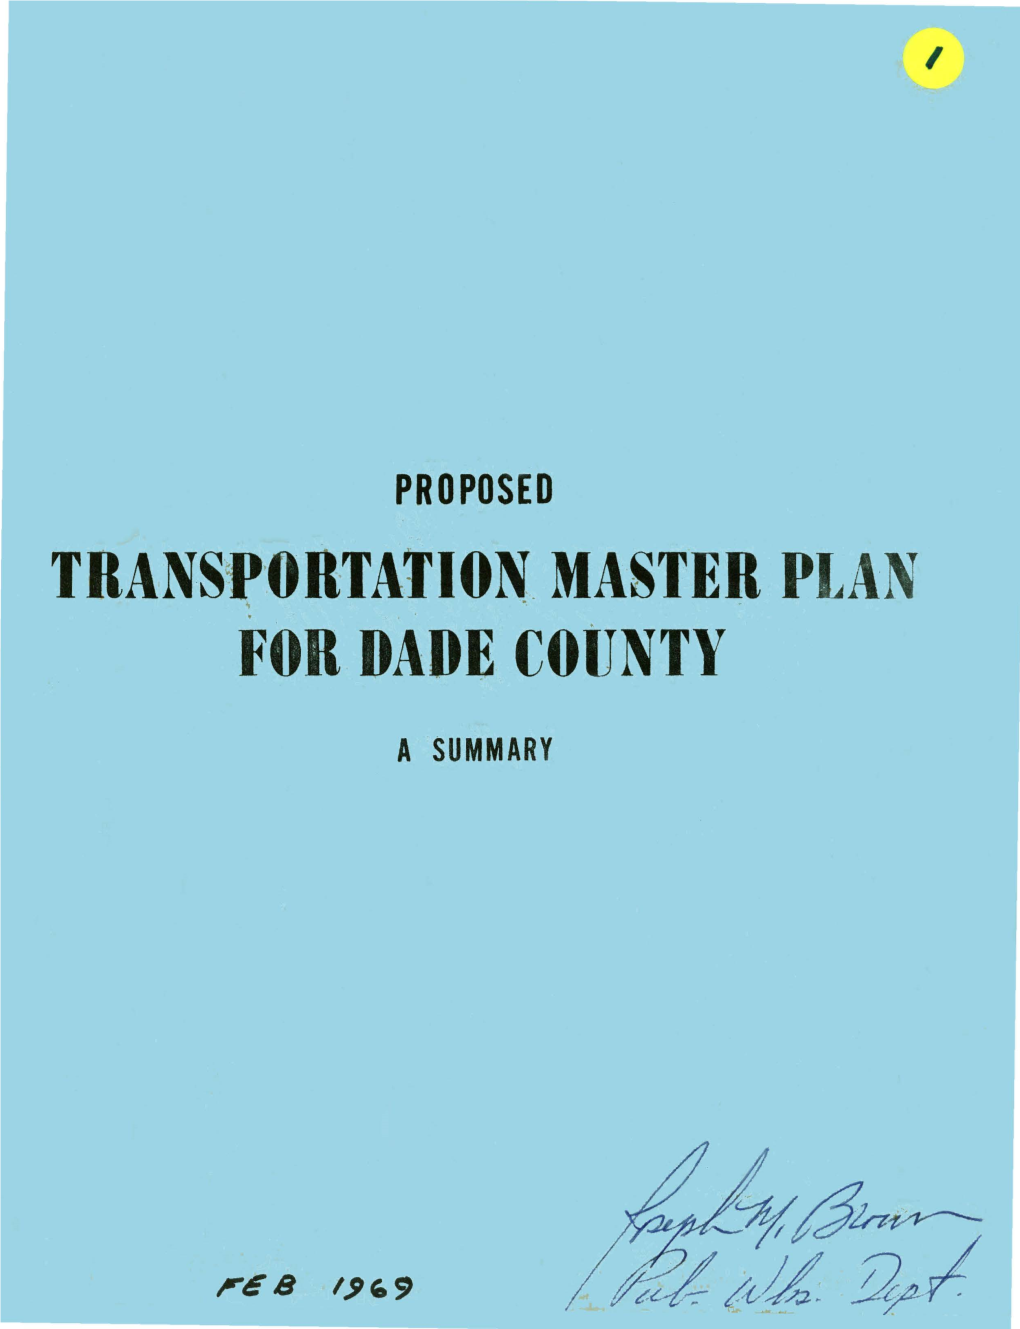 Proposed Transportation Master Plan for Dade County